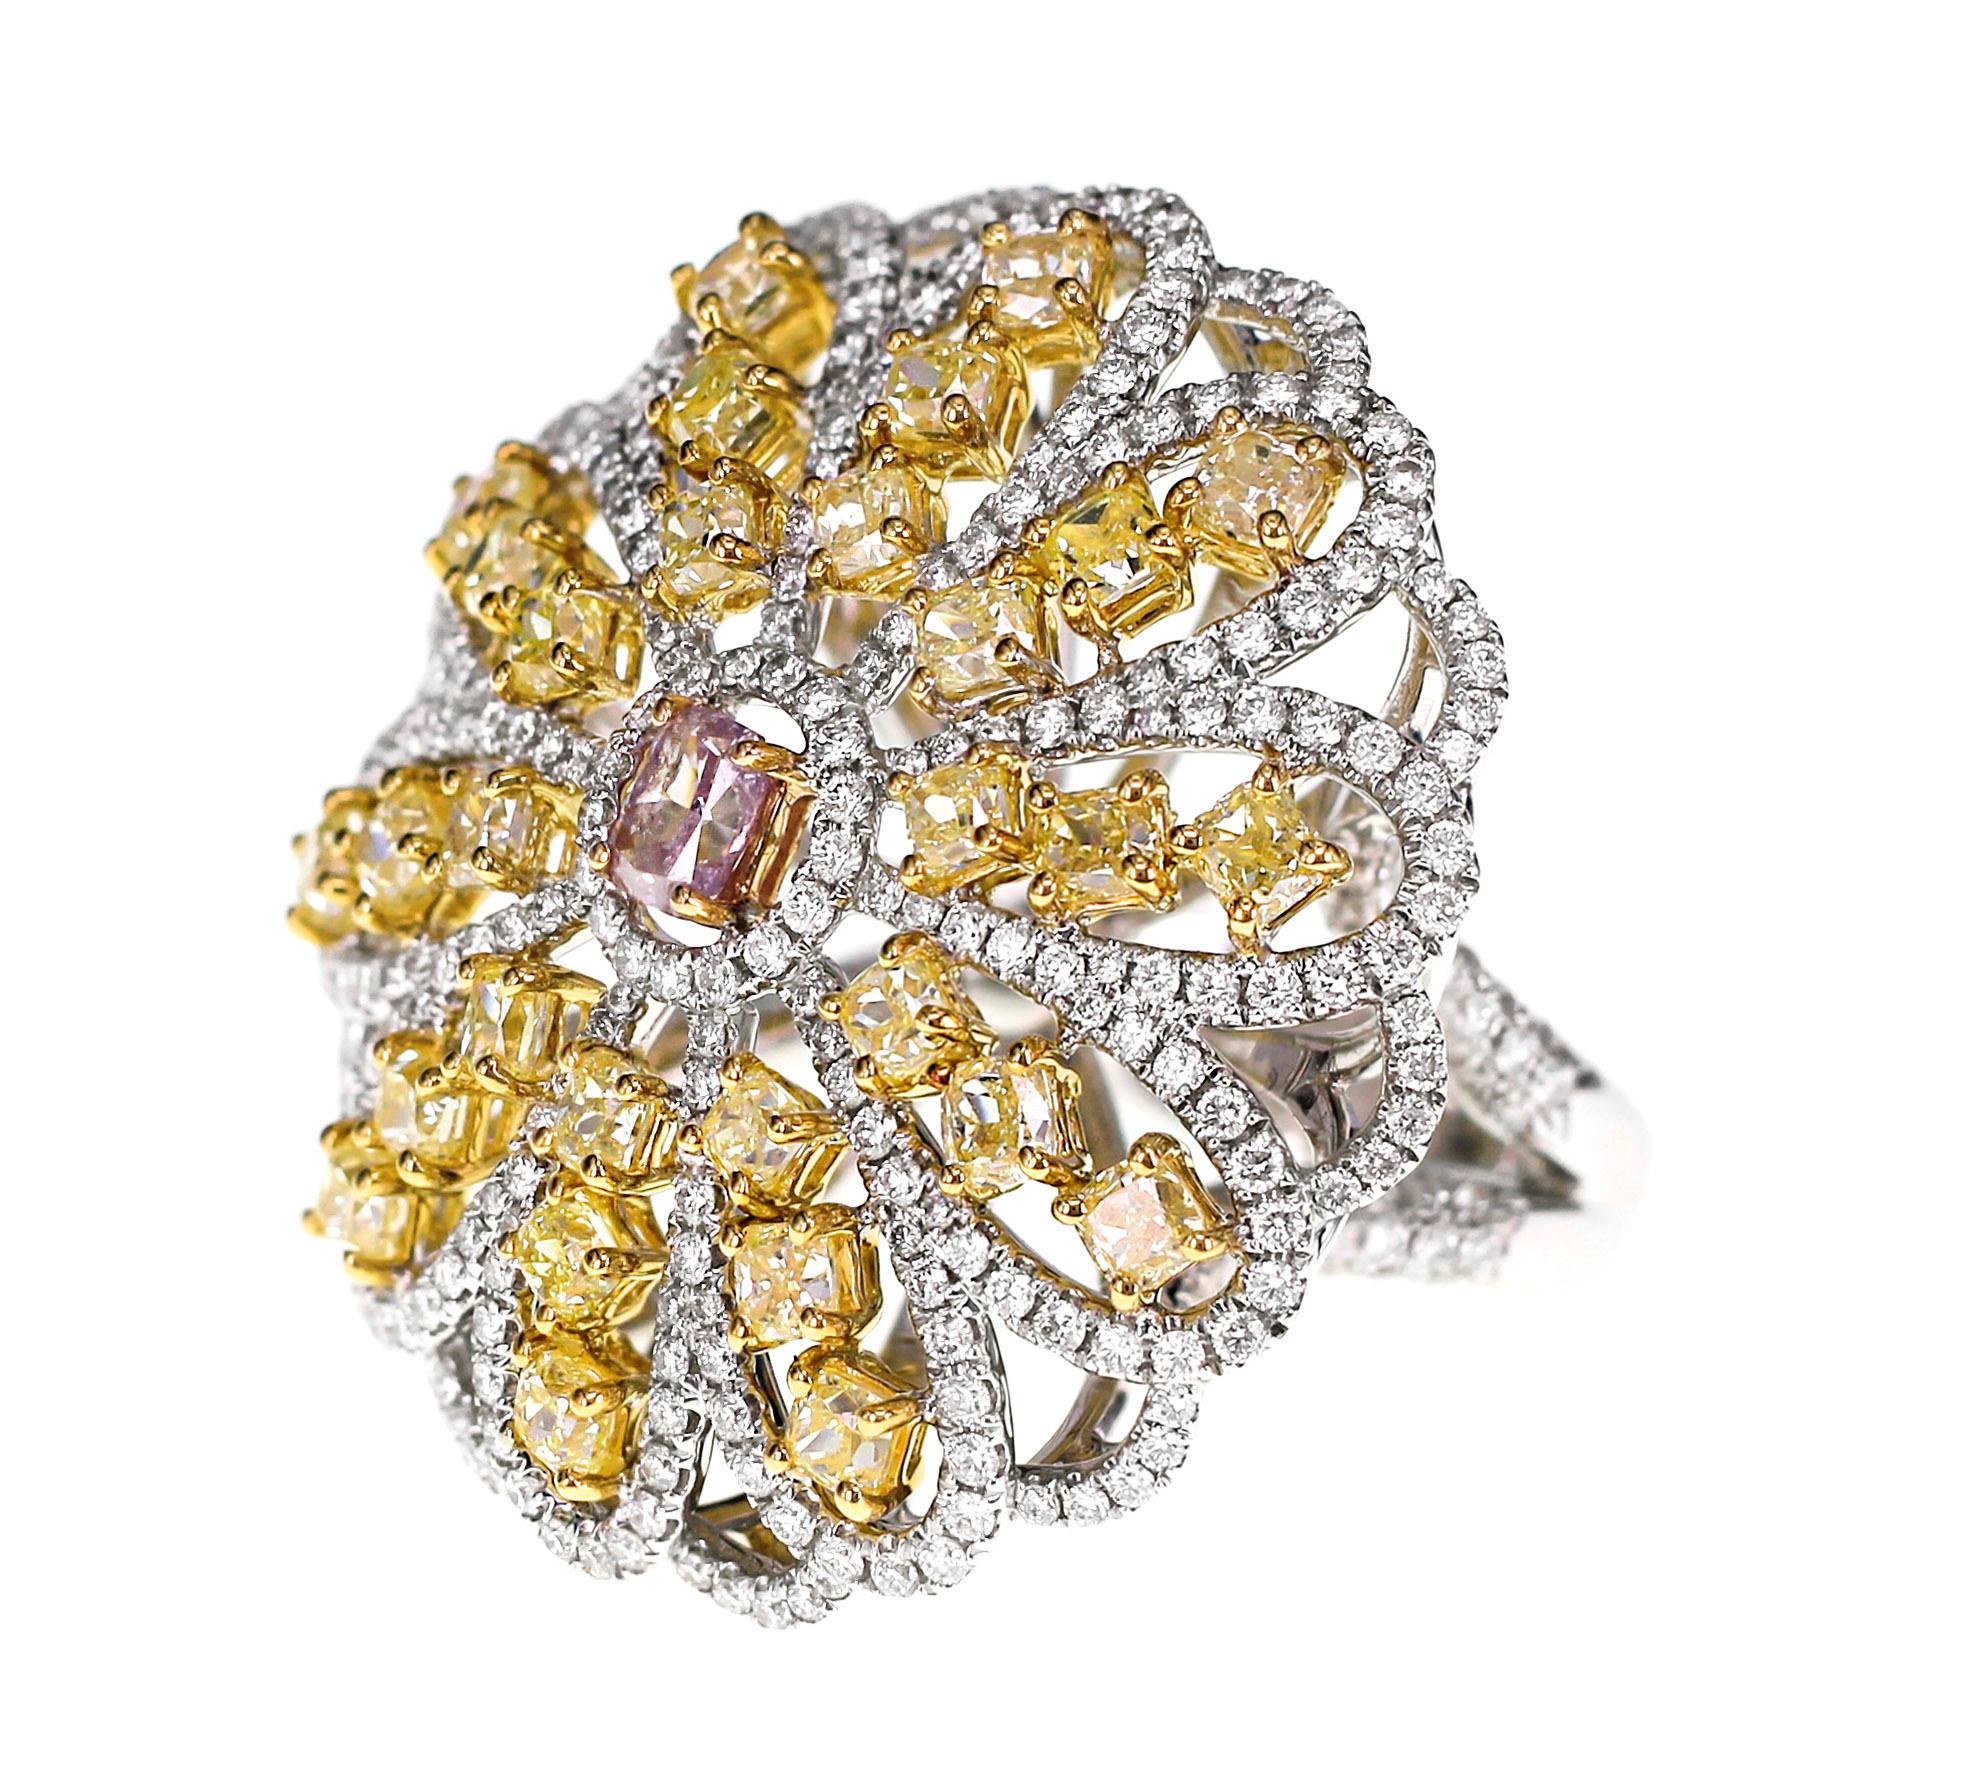 A Non certified Intense Pink Diamond is set in the center.
4.06 carats of Fancy Intense Yellow shapes are also set together.
2.26 carats of FG color VS quality white diamond are also set
Ring Size : US 6.25